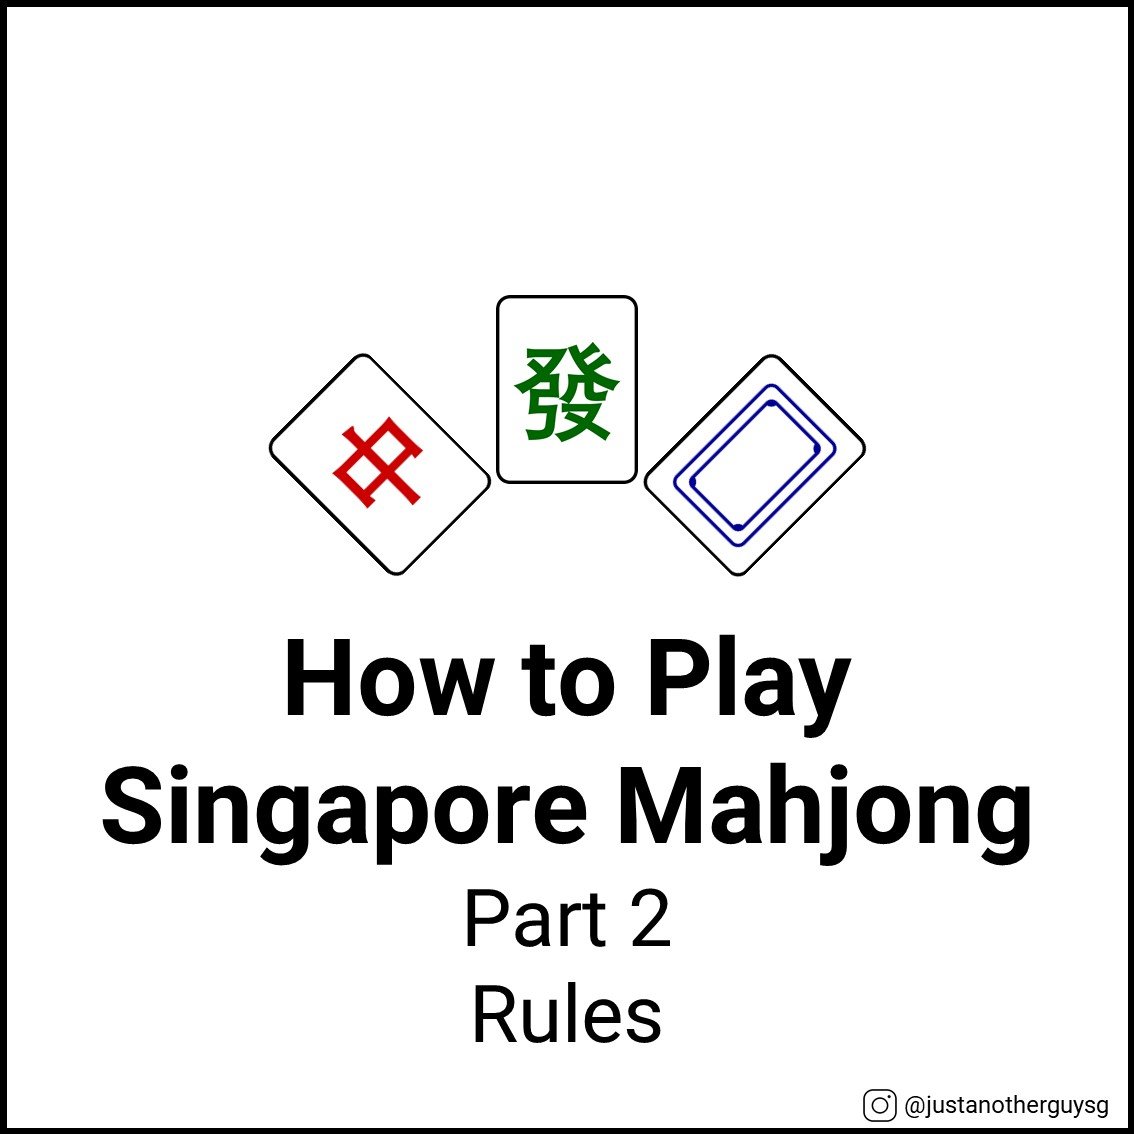 How to Play Singapore Mahjong – Part 2